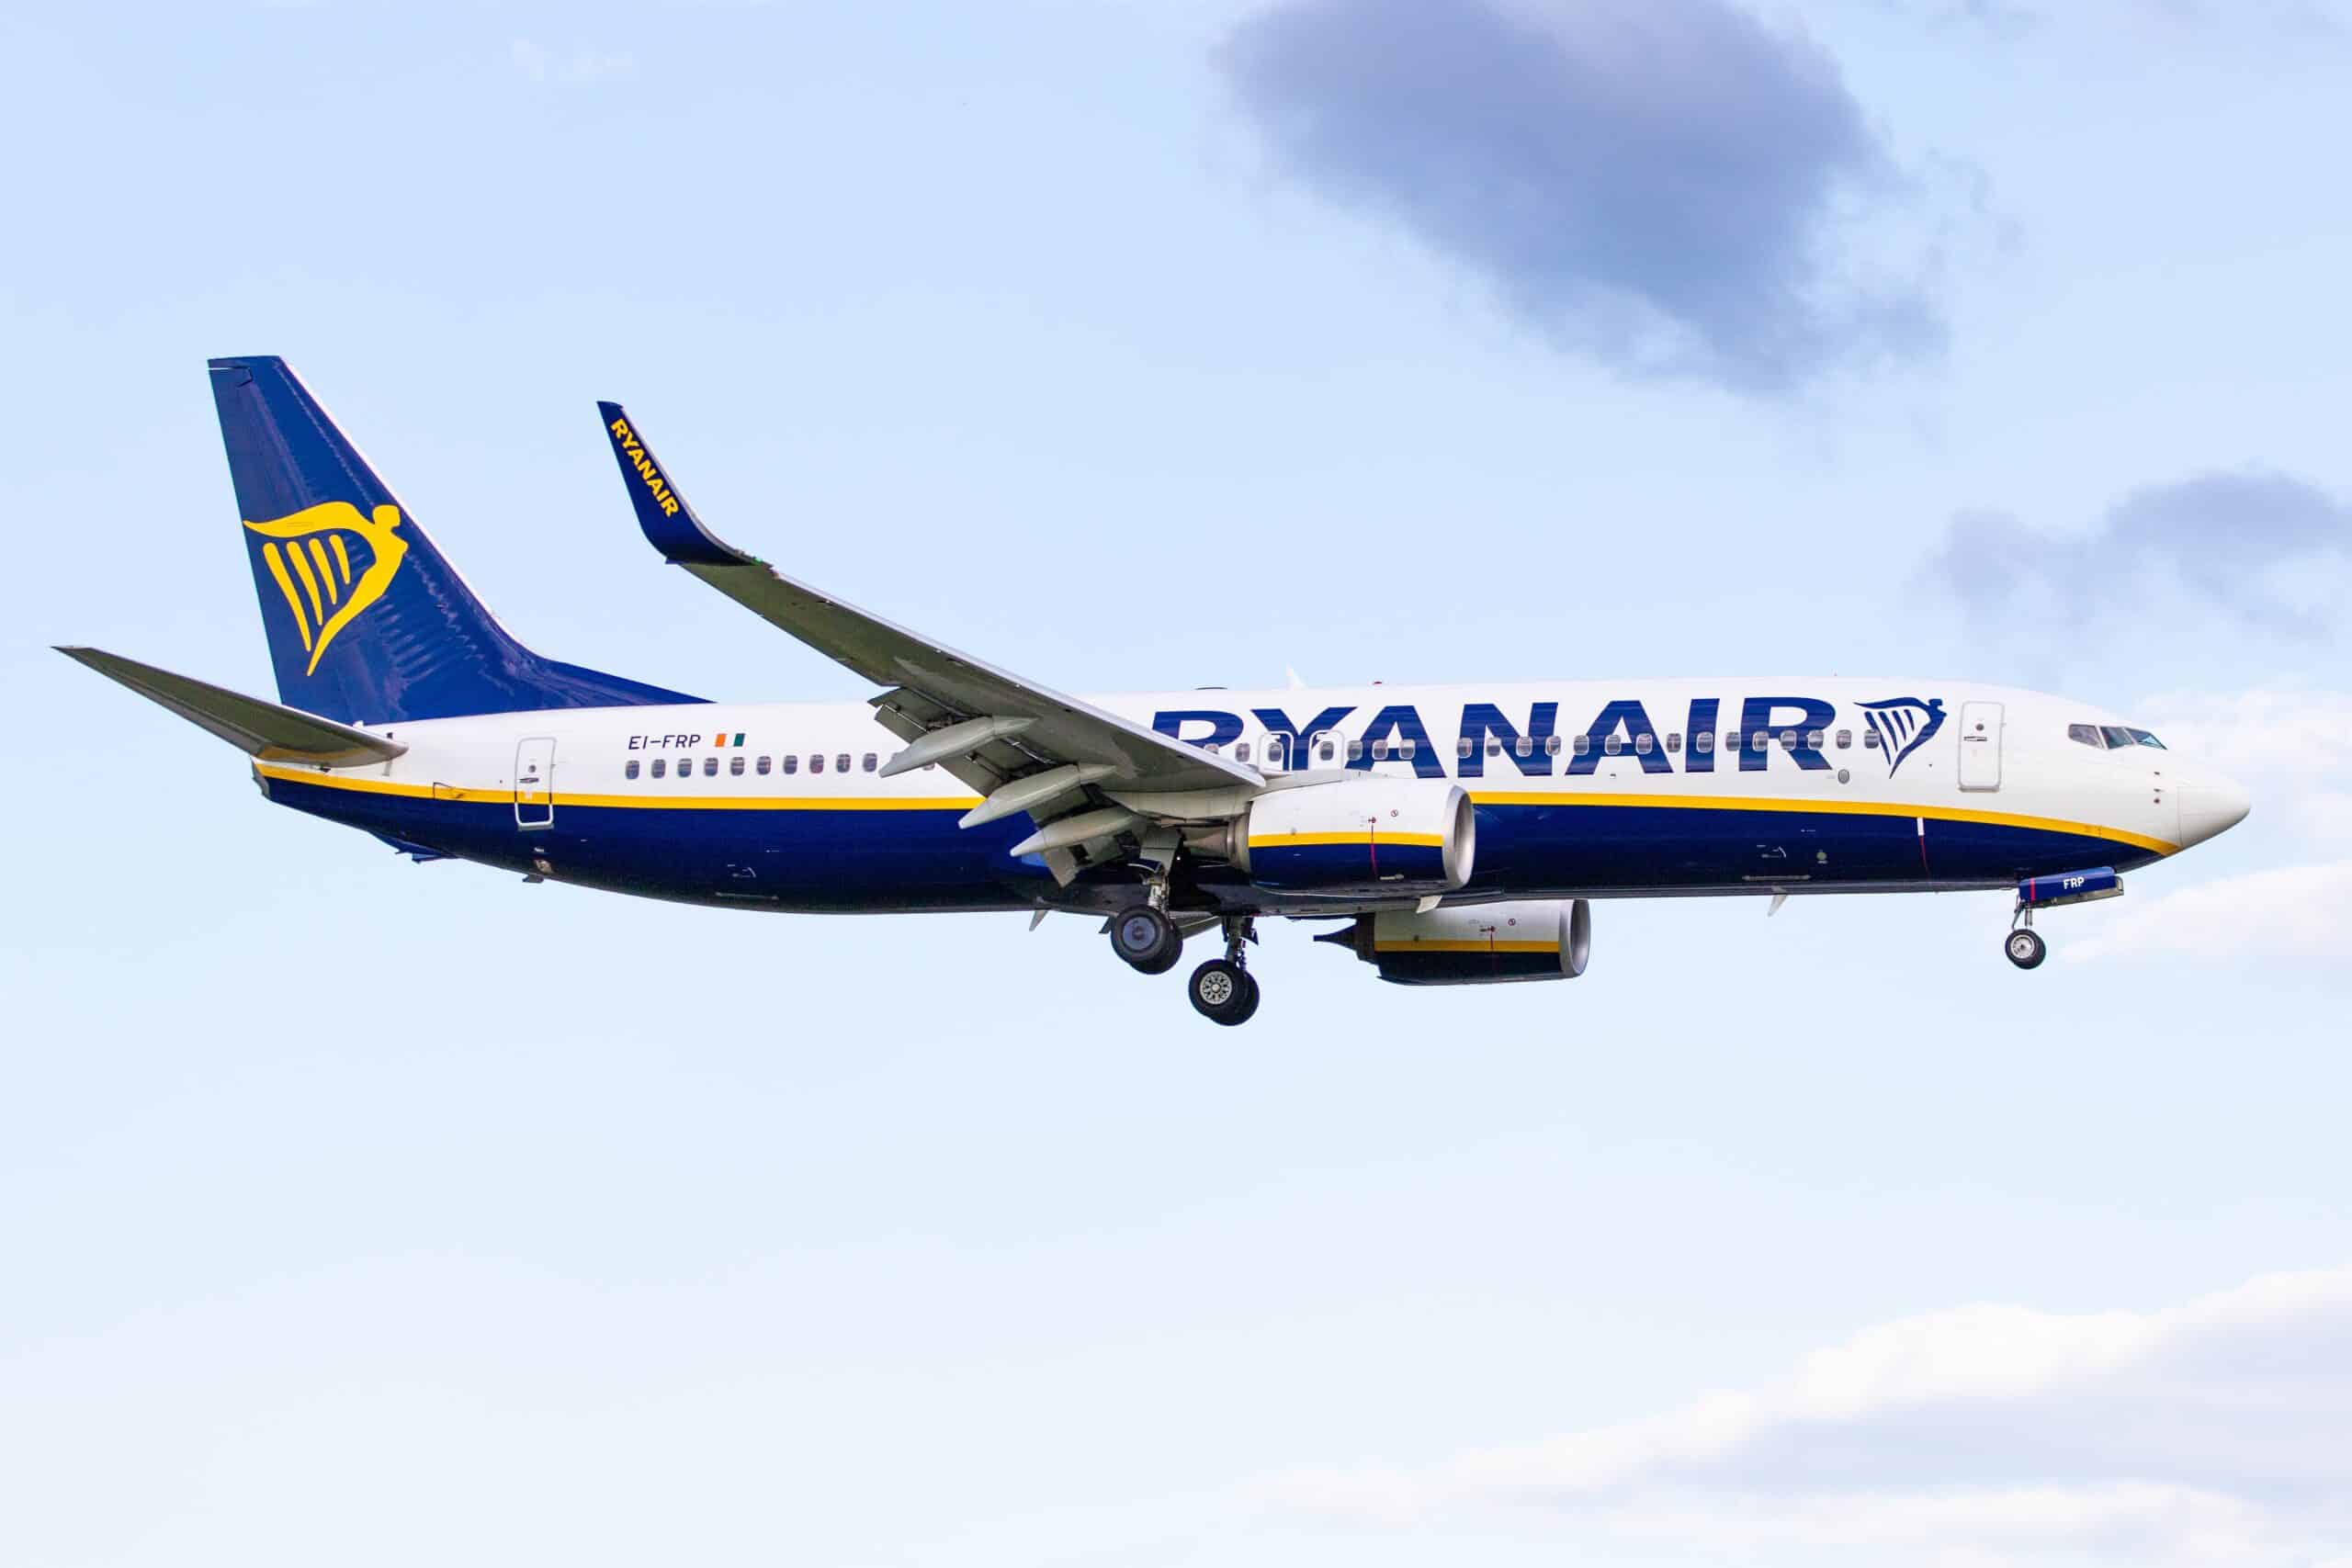 Ryanair makes amends for "landing in Palestine" announcement